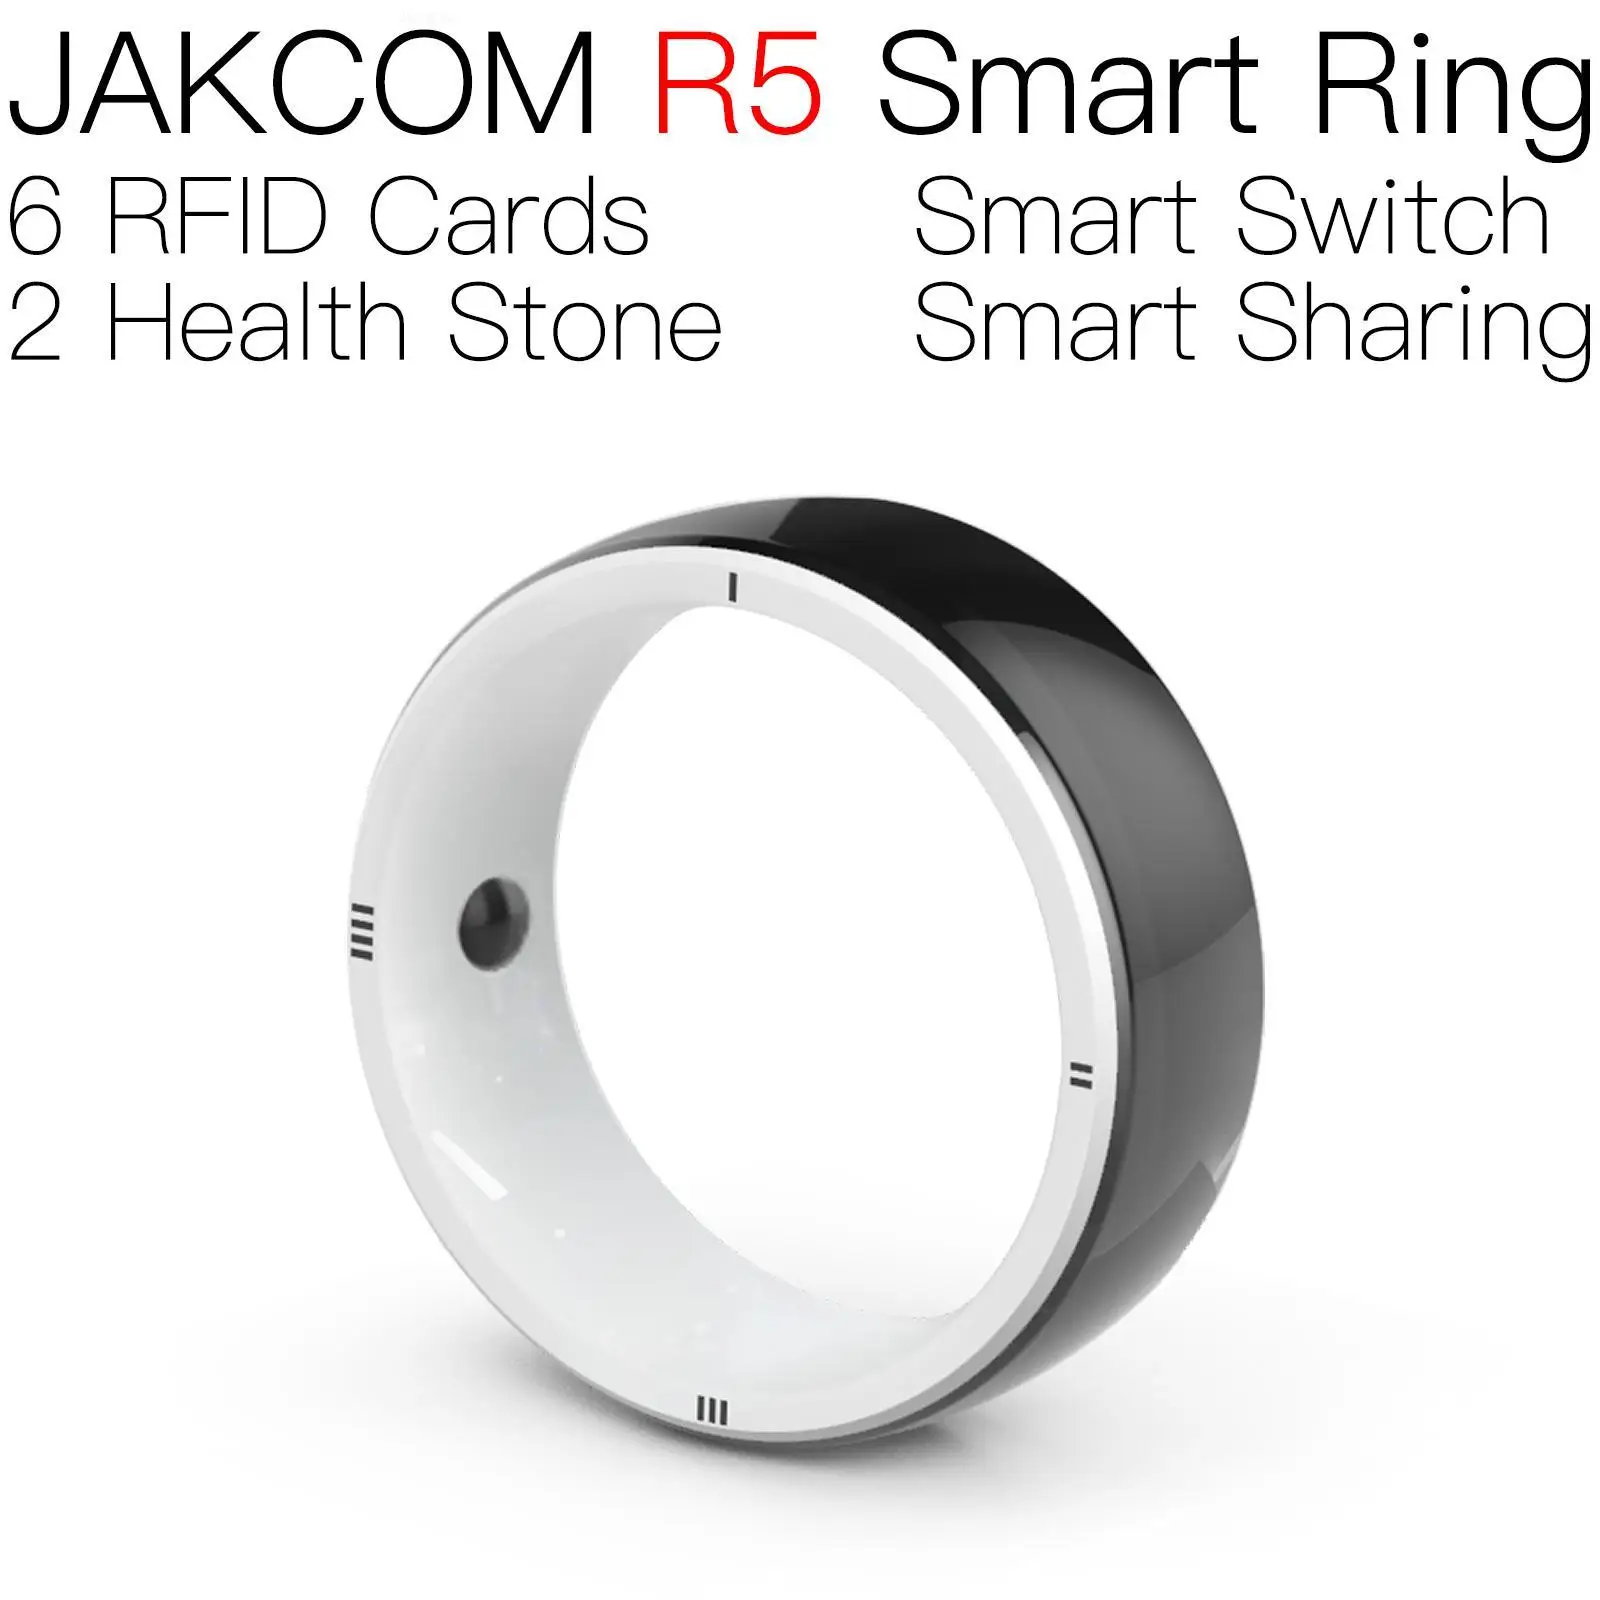 

JAKCOM R5 Smart Ring better than nfc tag uid changeable rfid key chip price hbo premium for microbit write t5577 tags